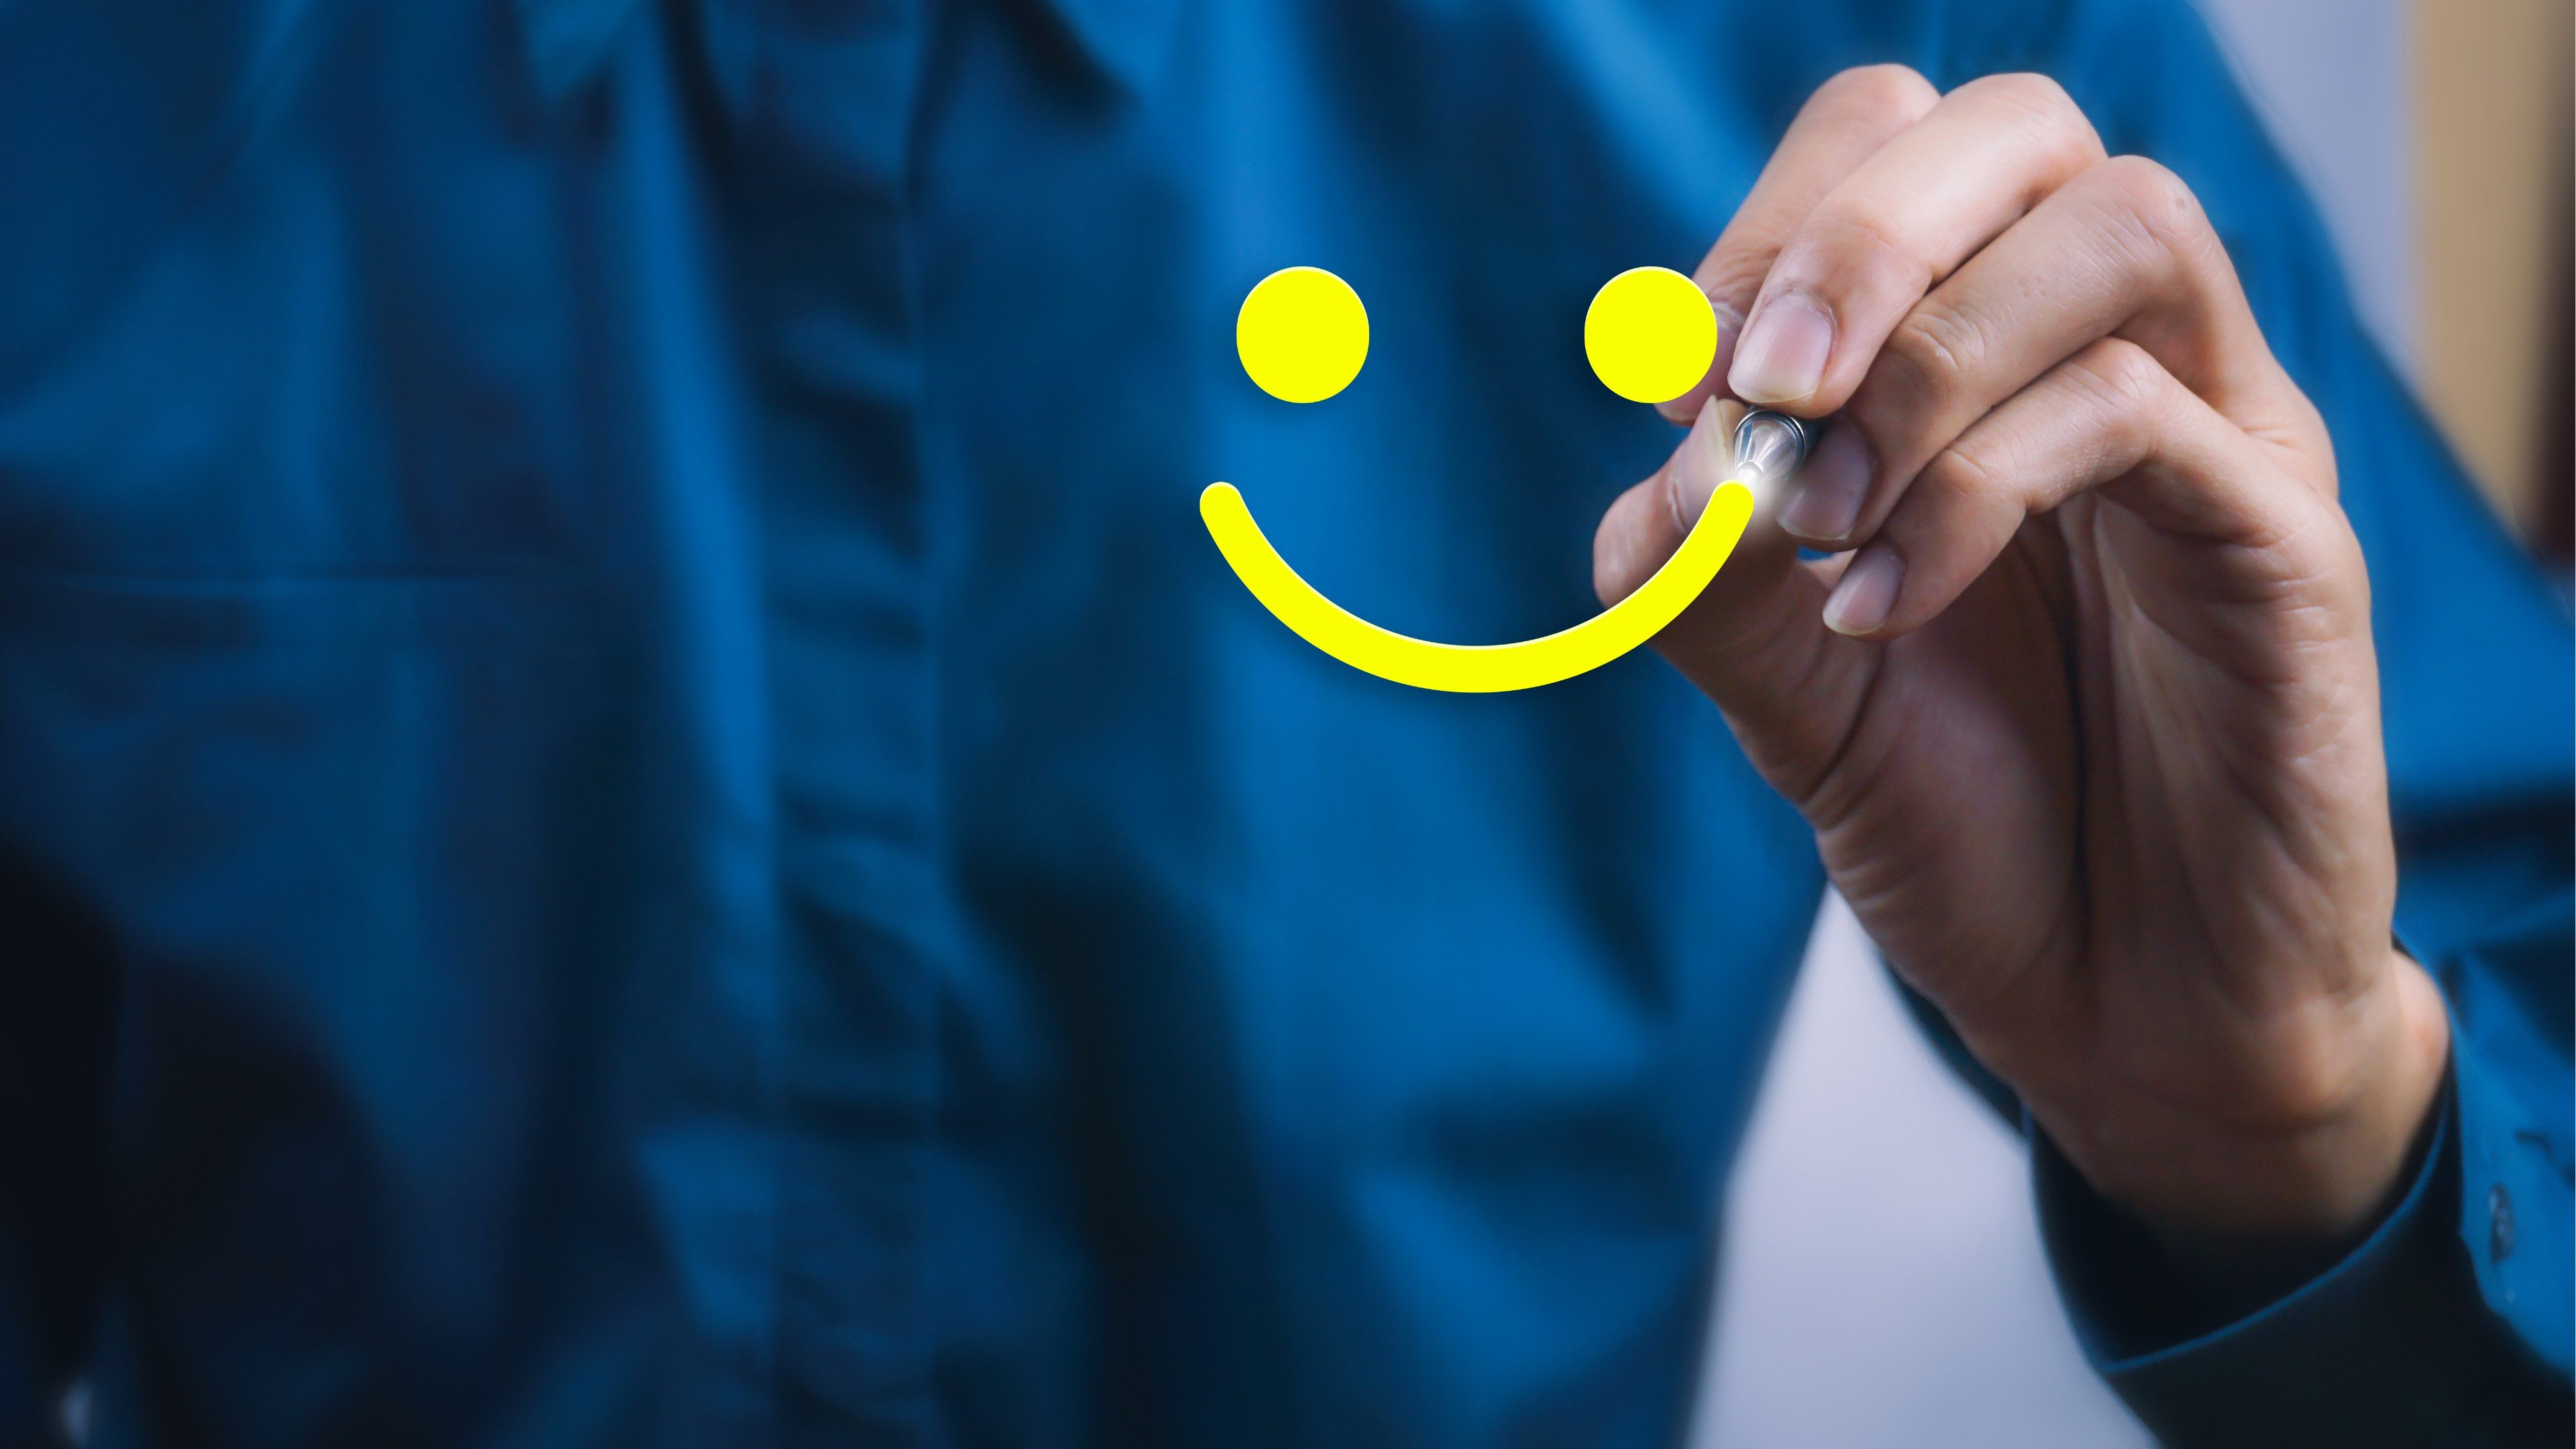 Conceptual the customer responded to the survey. The client using digital pen write happy face smile icon. Depicts that customer is very satisfied. Service experience and satisfaction concept.